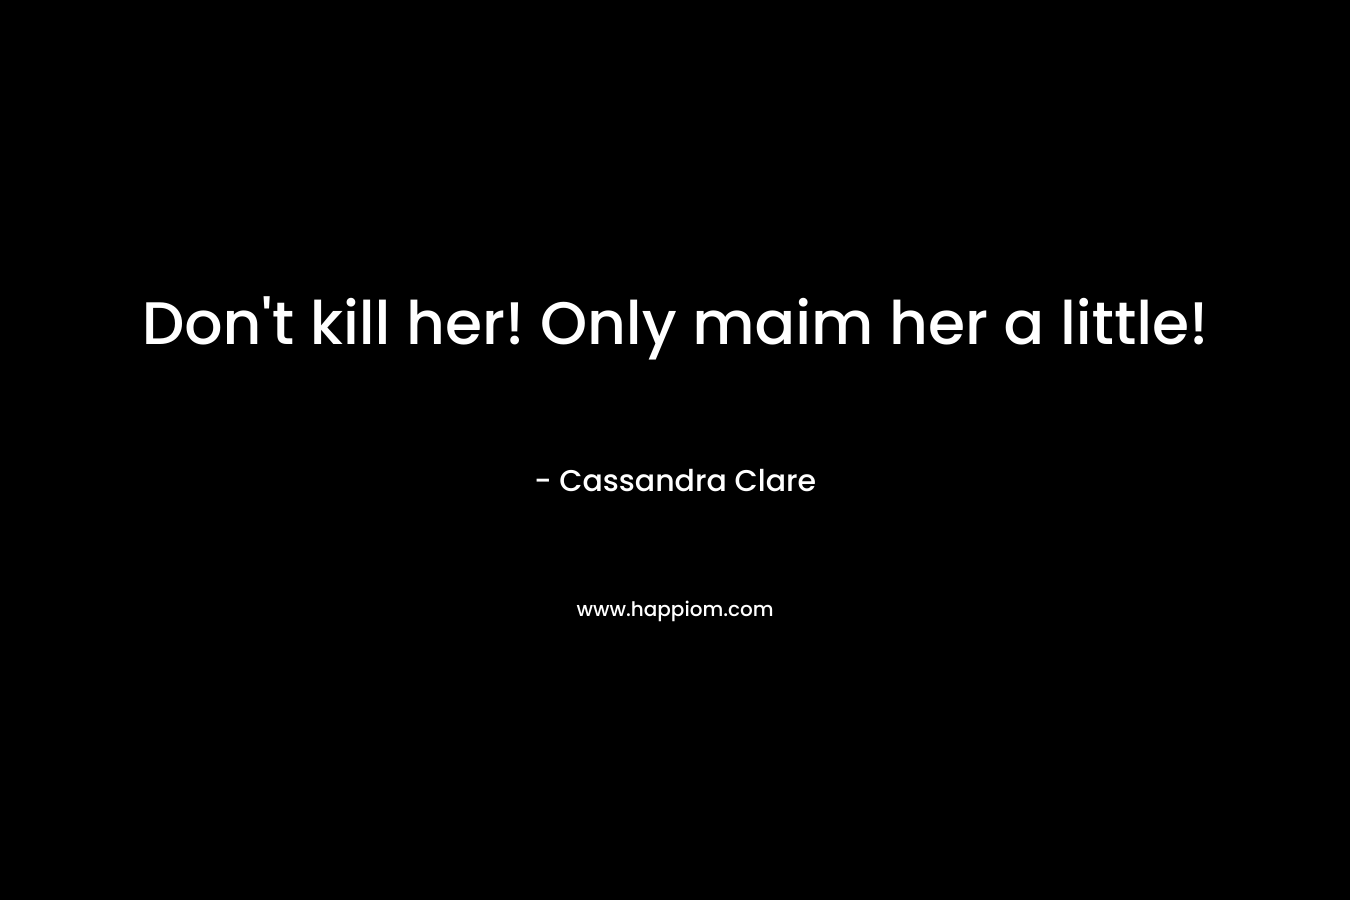 Don't kill her! Only maim her a little!